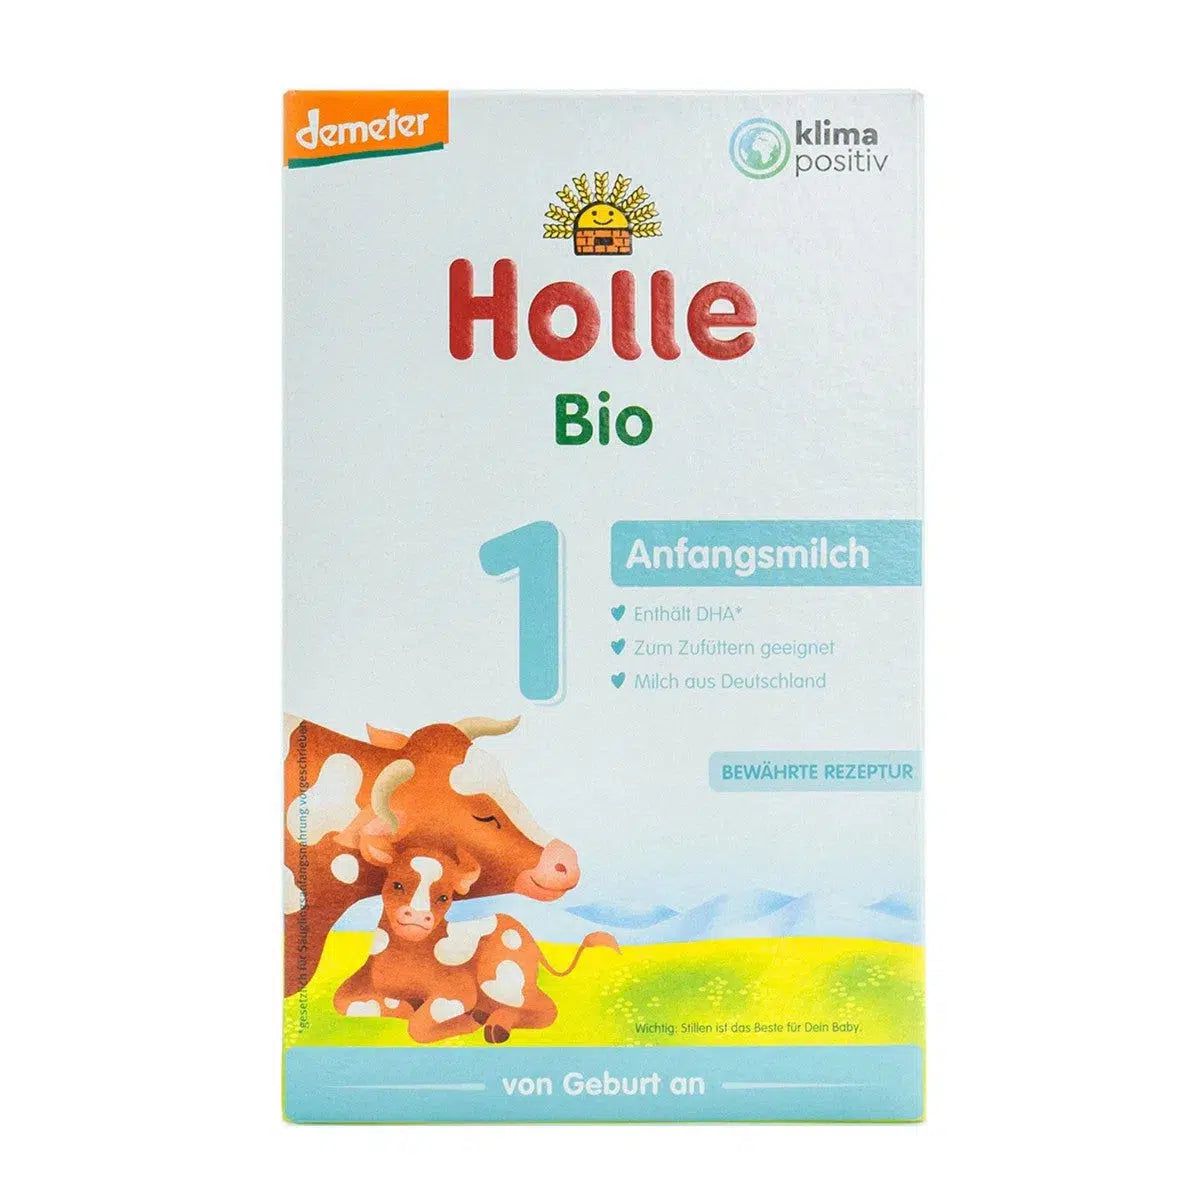 Promo Product: Holle Cow - Buy 4 Get 5